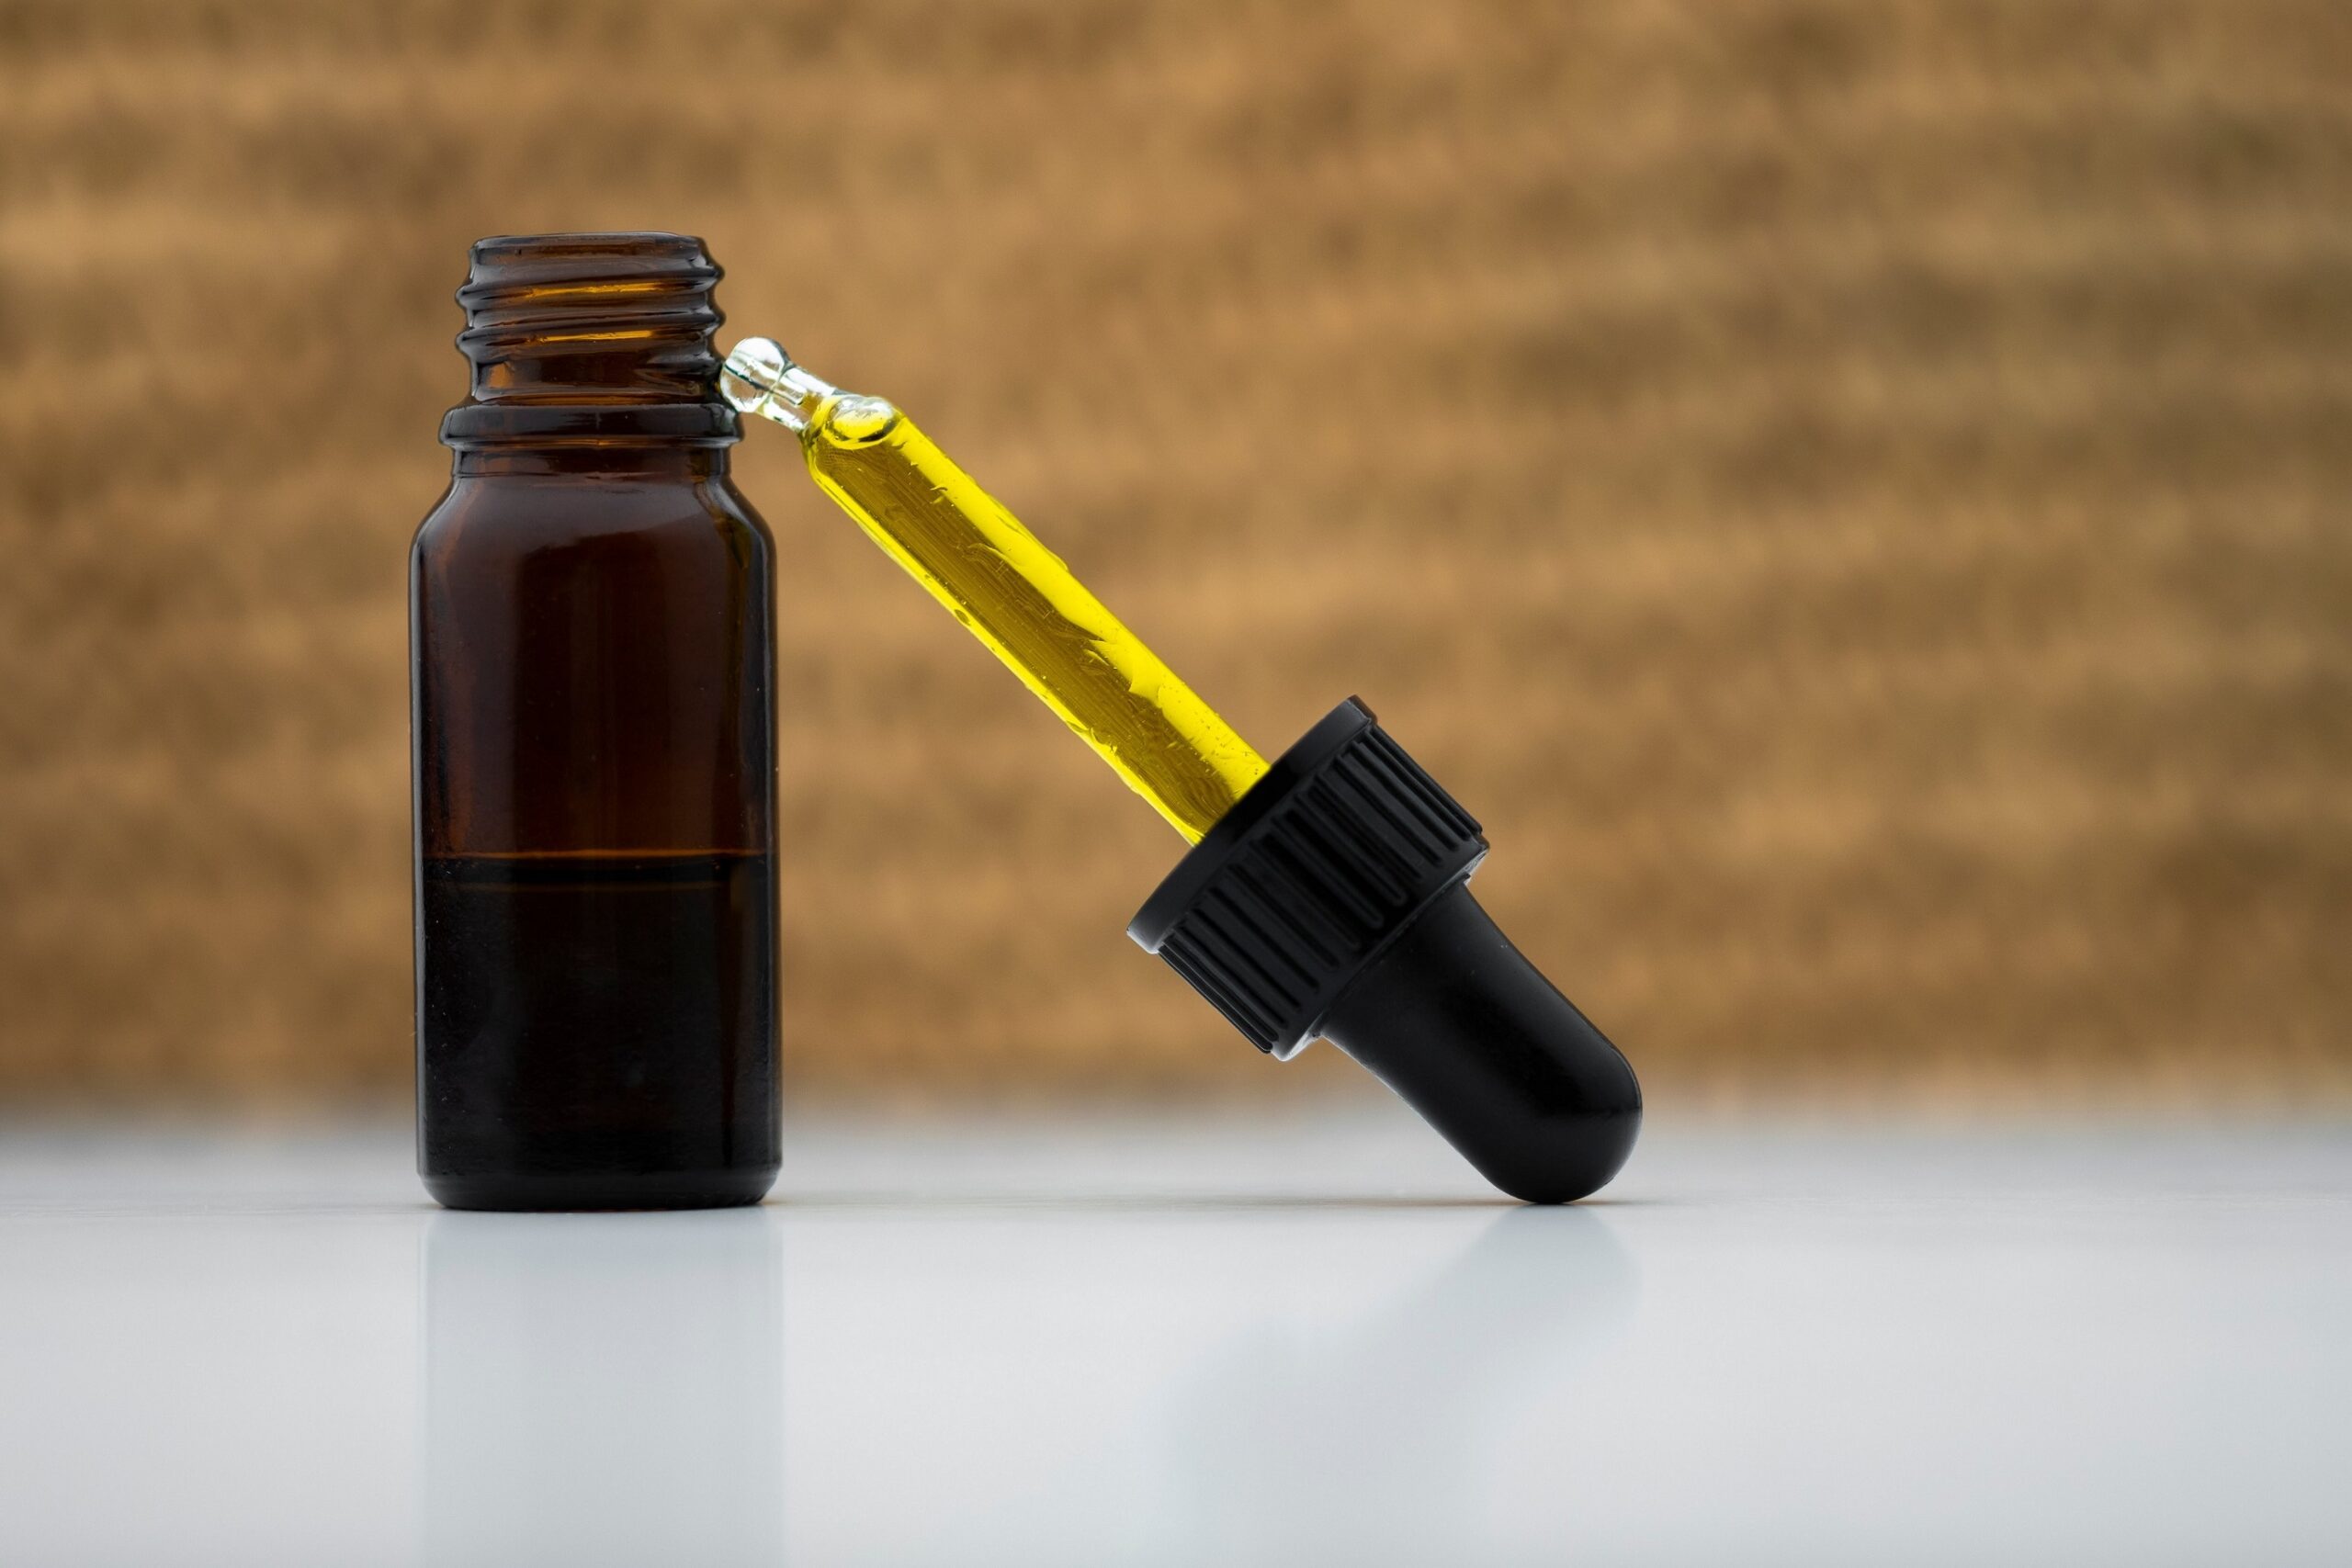 How Are CBD Tinctures Made?